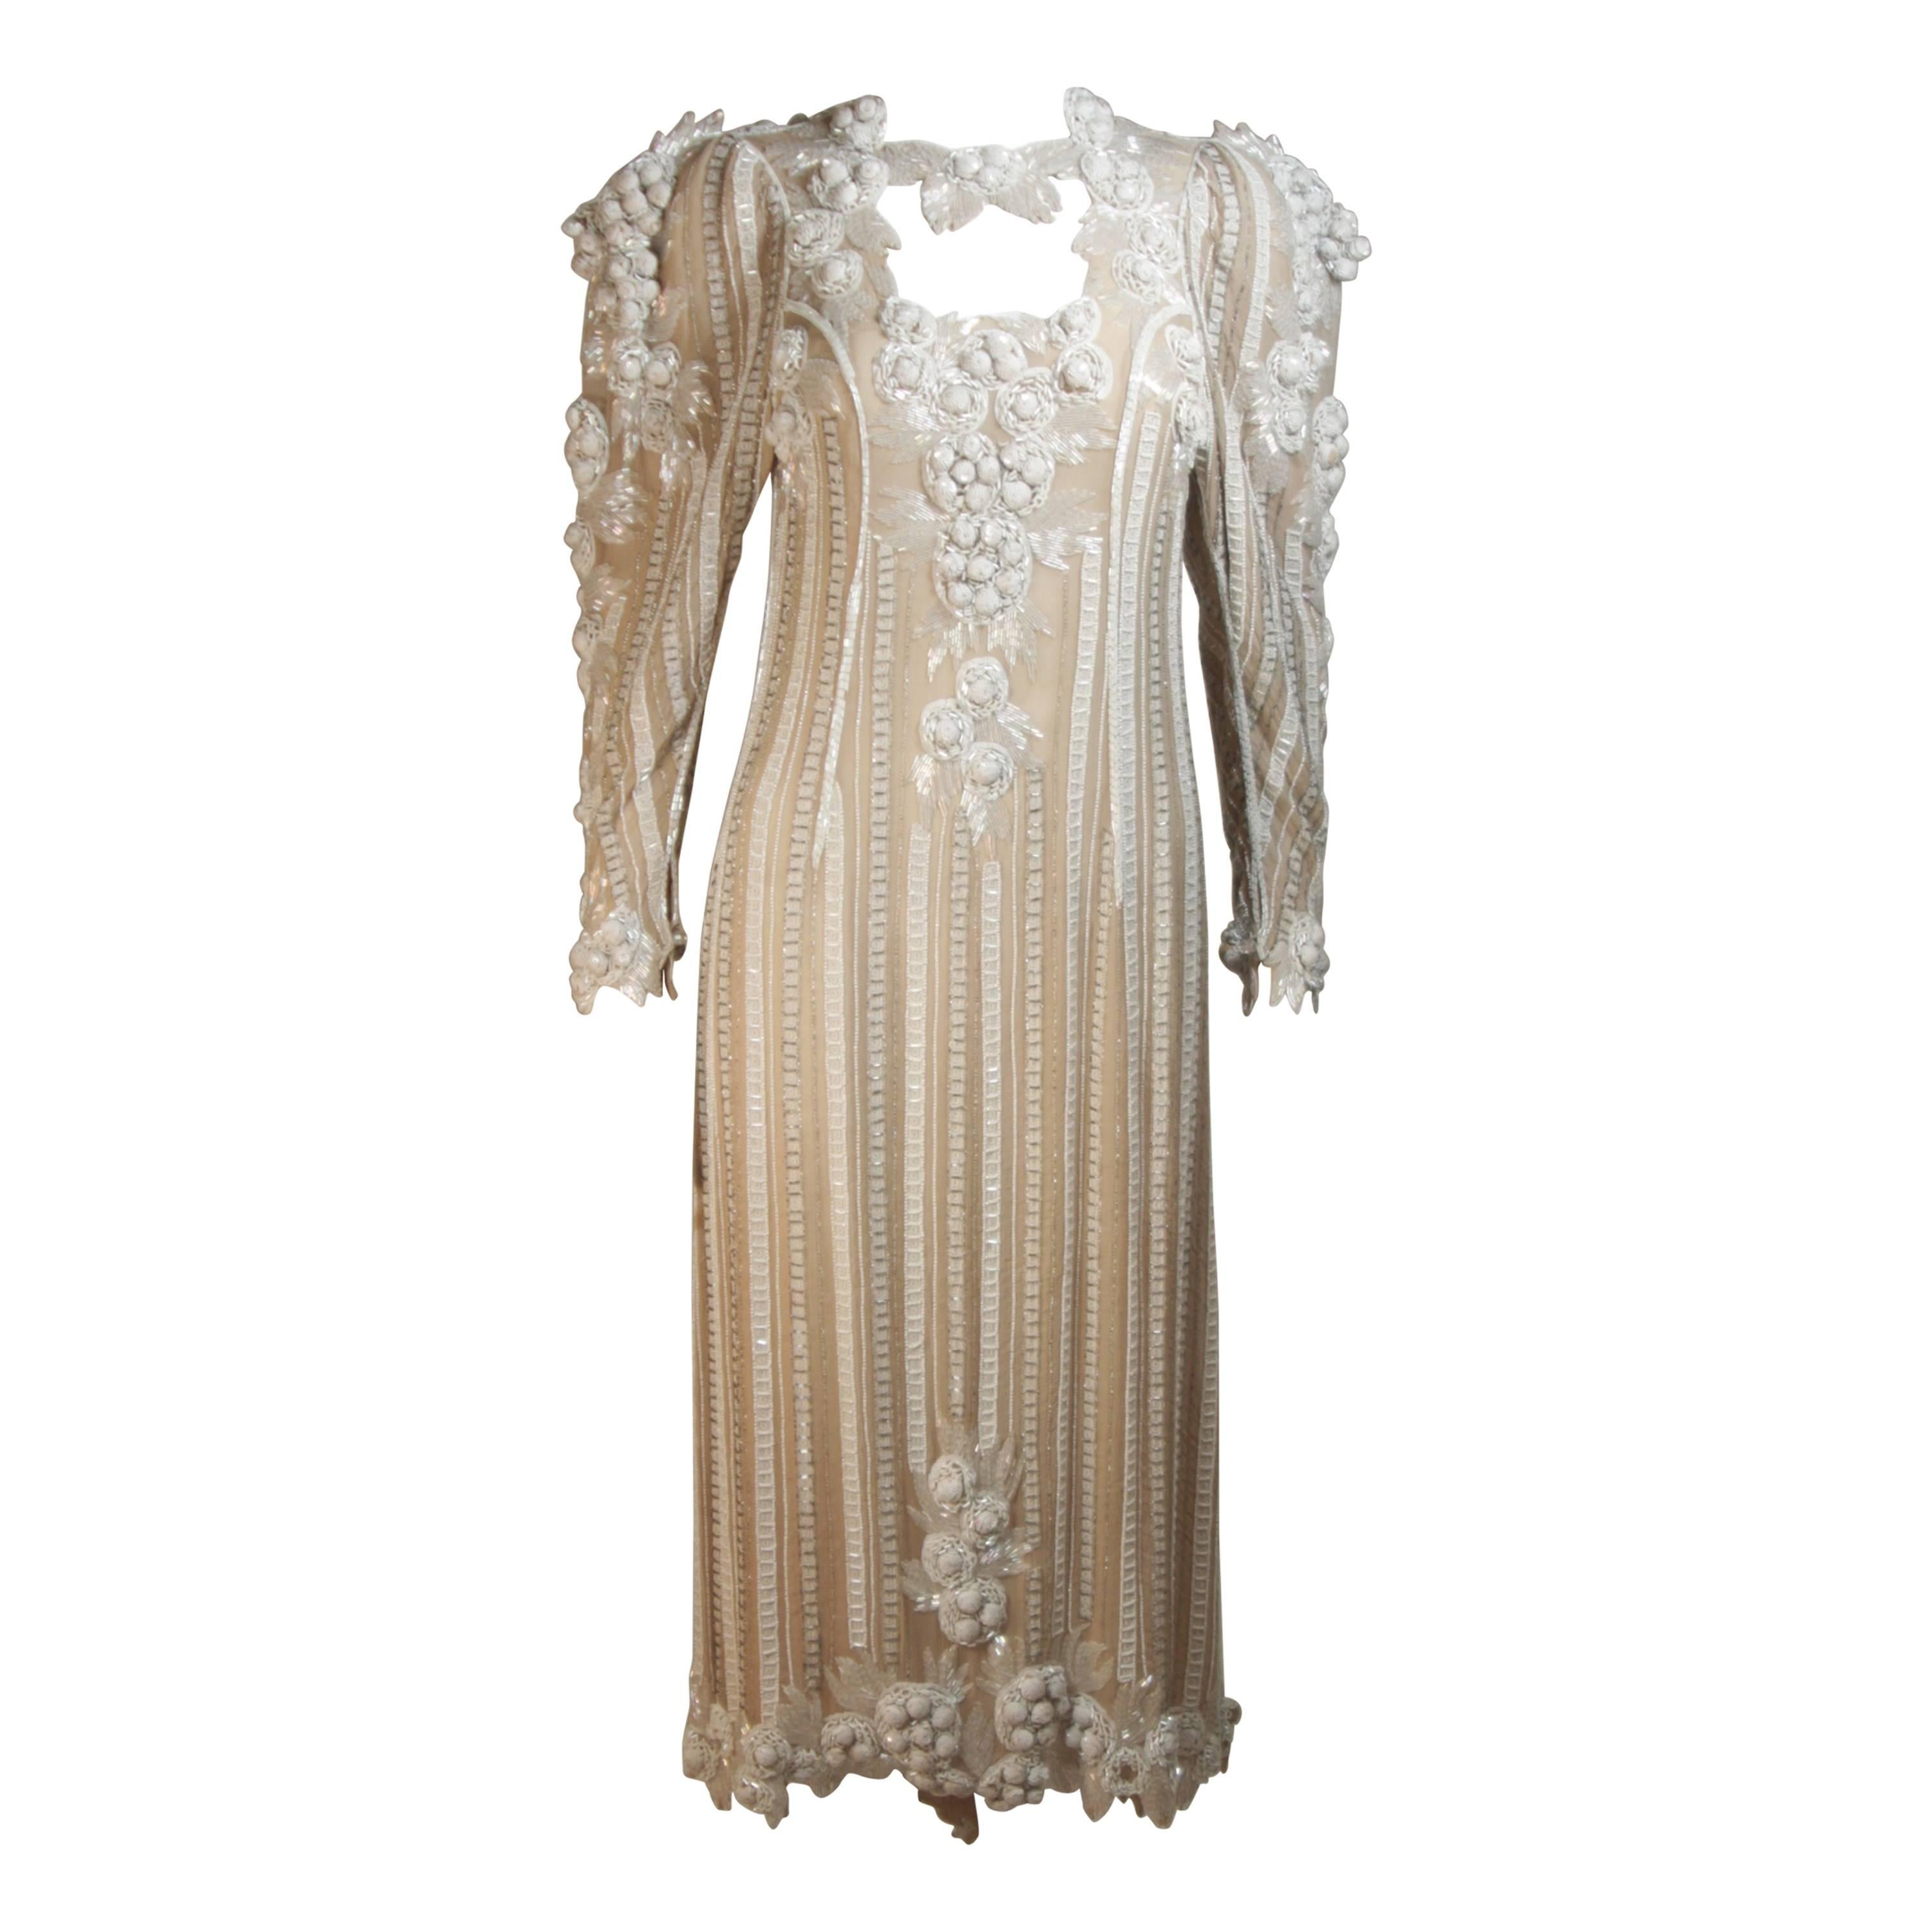 APROPOS 1980's Ivory Beaded Gown with Shoulder Accents Size 6-8